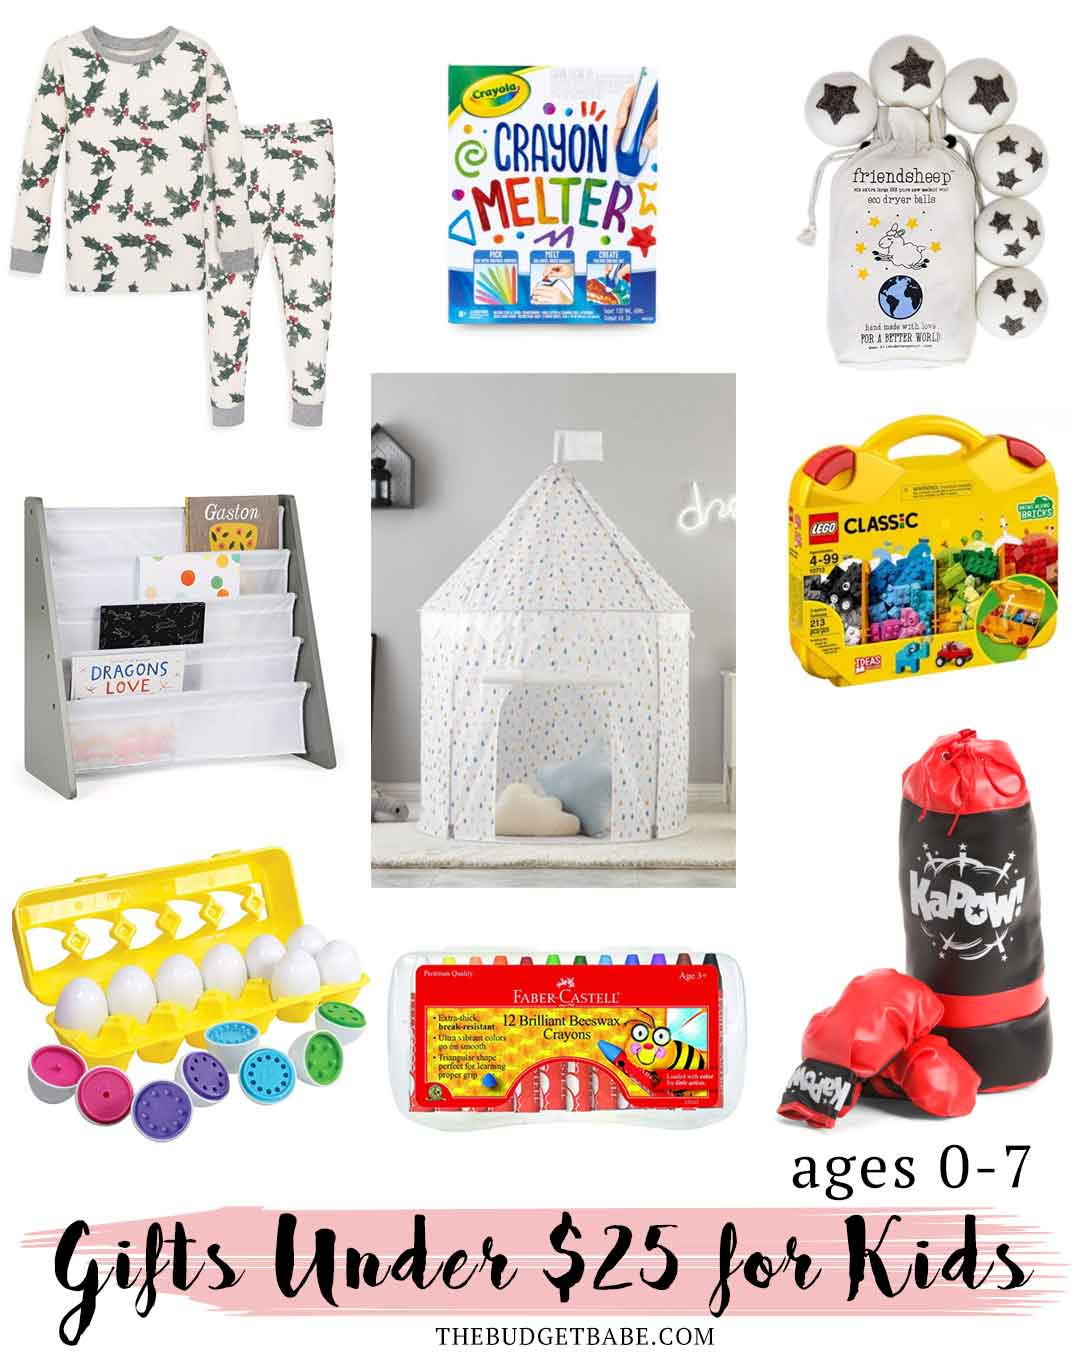 Christmas gift ideas for young kids they'll love! Under $25!